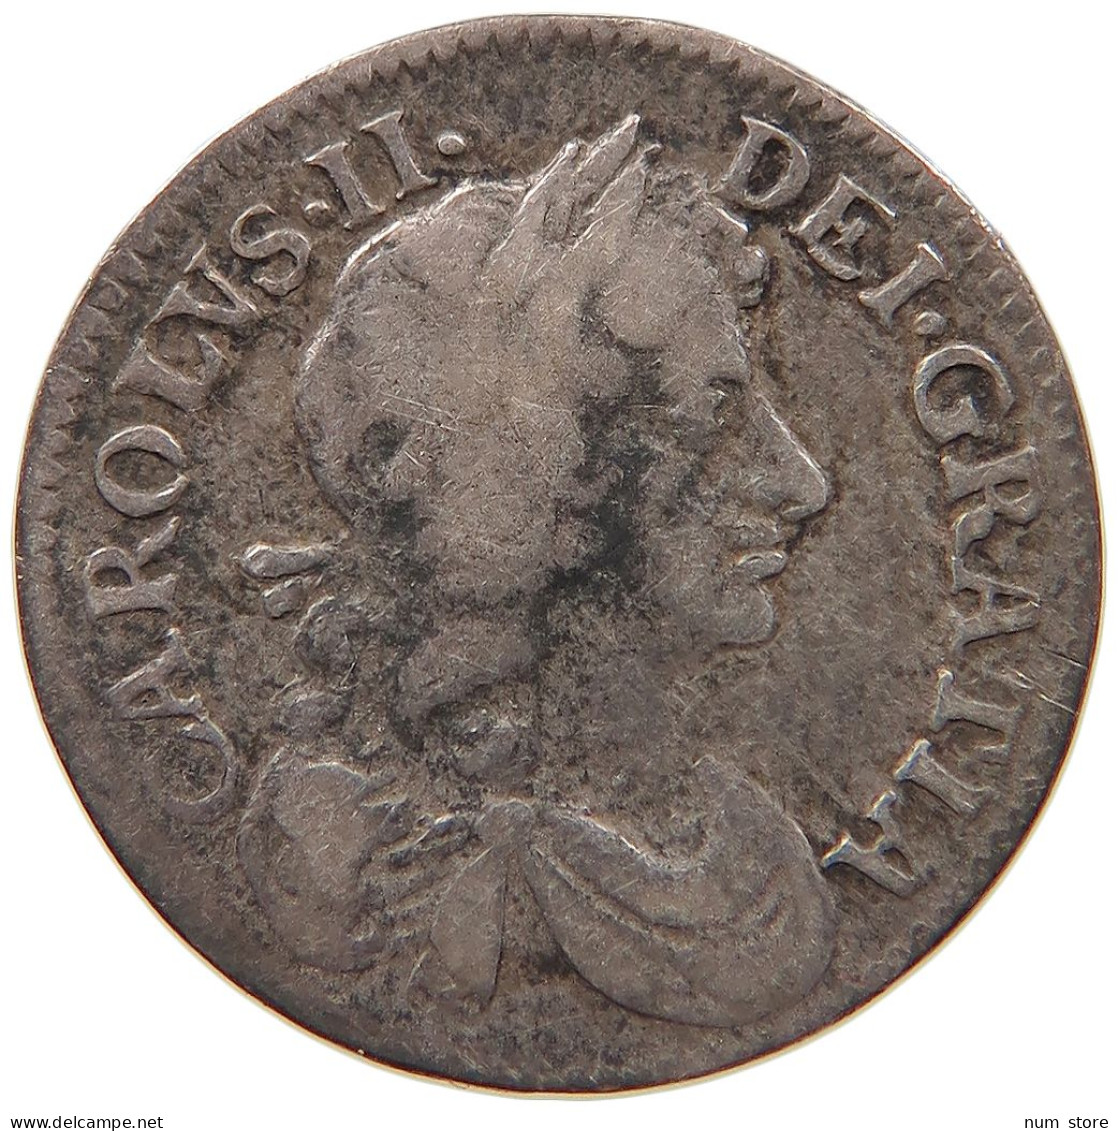 GREAT BRITAIN FOURPENCE 4 PENCE 1684 Charles II (1660-1685) #t021 0265 - G. 4 Pence/ Groat